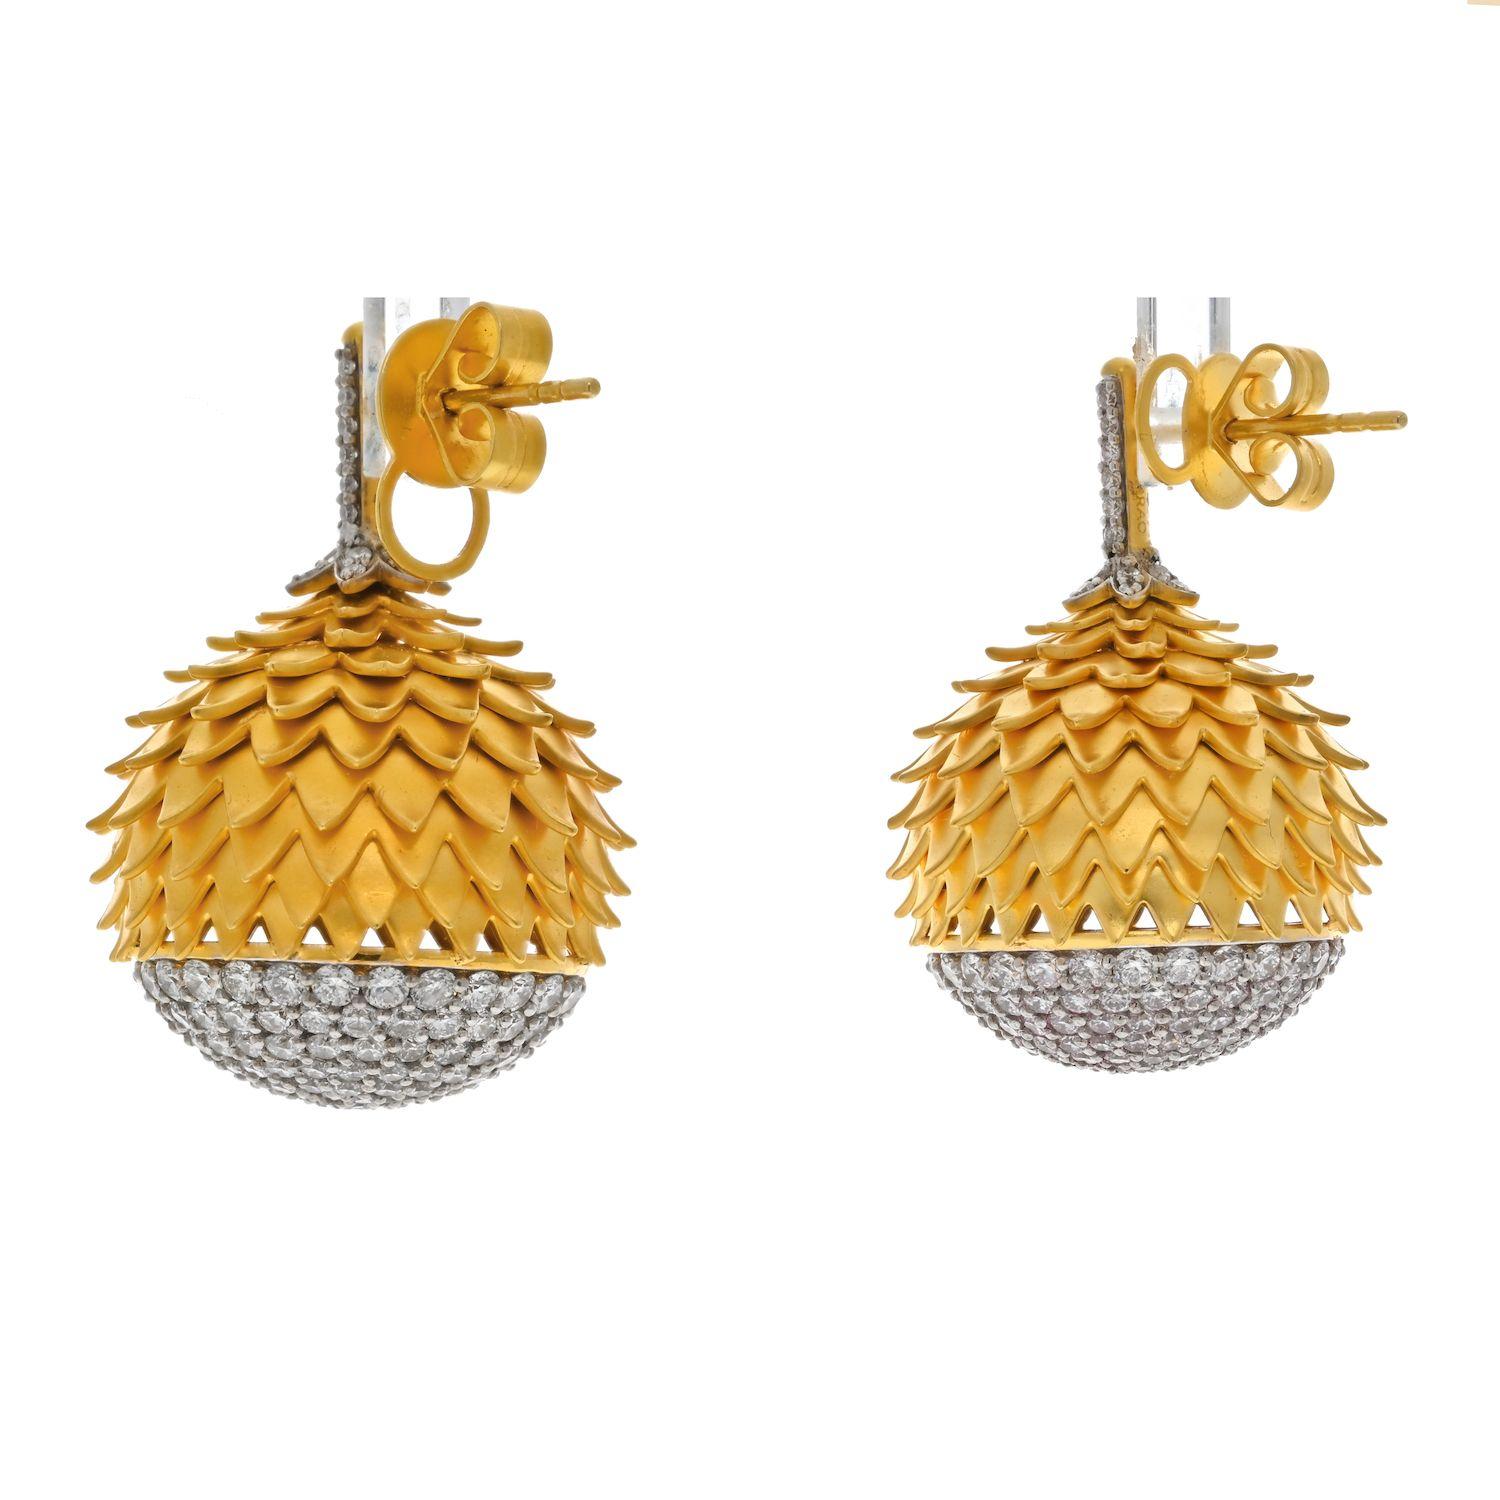 Refined diamond and 18K yellow gold earrings. Resembling acorns, they are adorned with high grade round brilliant cut diamonds. Featuring a very detailed satin finish gold setting. 
Earrings measure in length: 30mm
And 21 mm at the widest point.